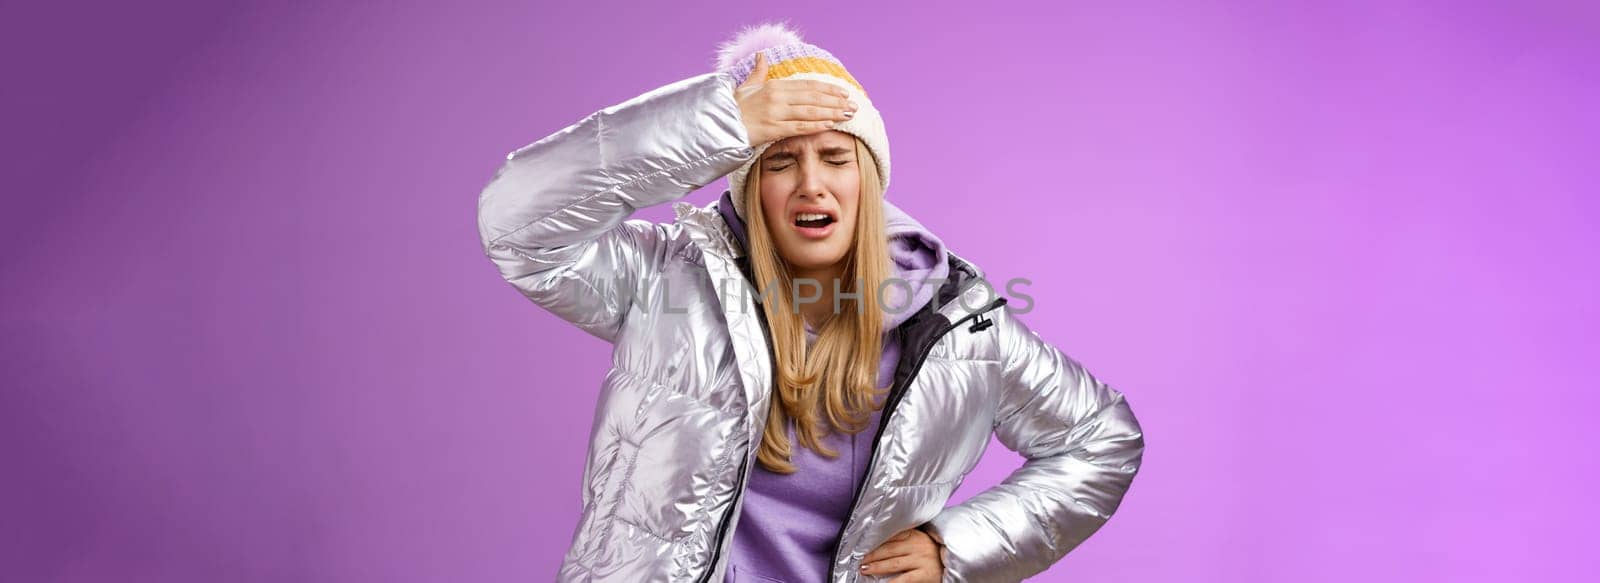 Girl sick tired touch forehead painful feeling grimacing complaining boyfriend shot snowball woman face standing bothered fed up and upset, whining displeased suffering headache, purple background.